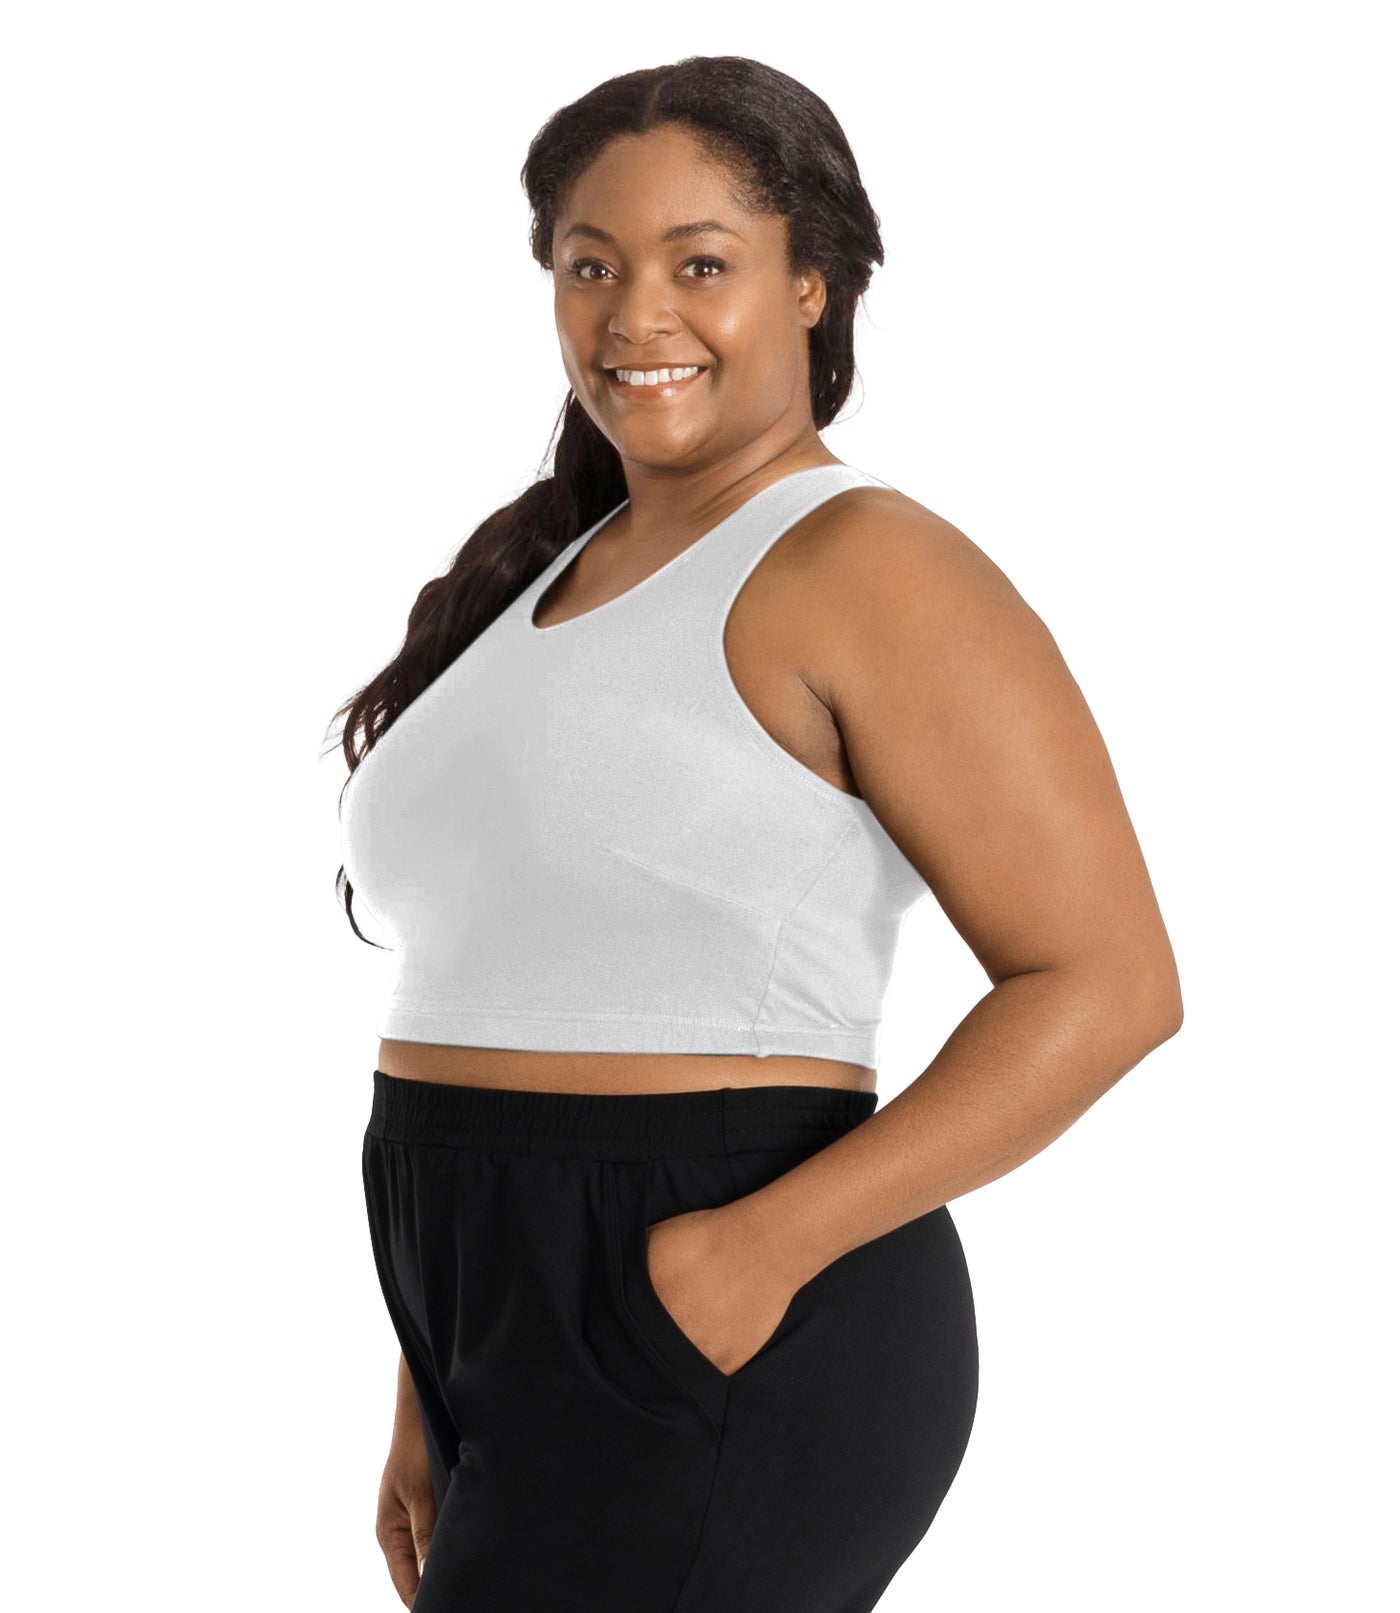 Plus size woman, facing right front side, wearing a white JunoActive Stretch naturals full fit plus size bra. Featuring a v-neck and side bust darts for a full fit. She is also wearing black JunoActive plus size pants.